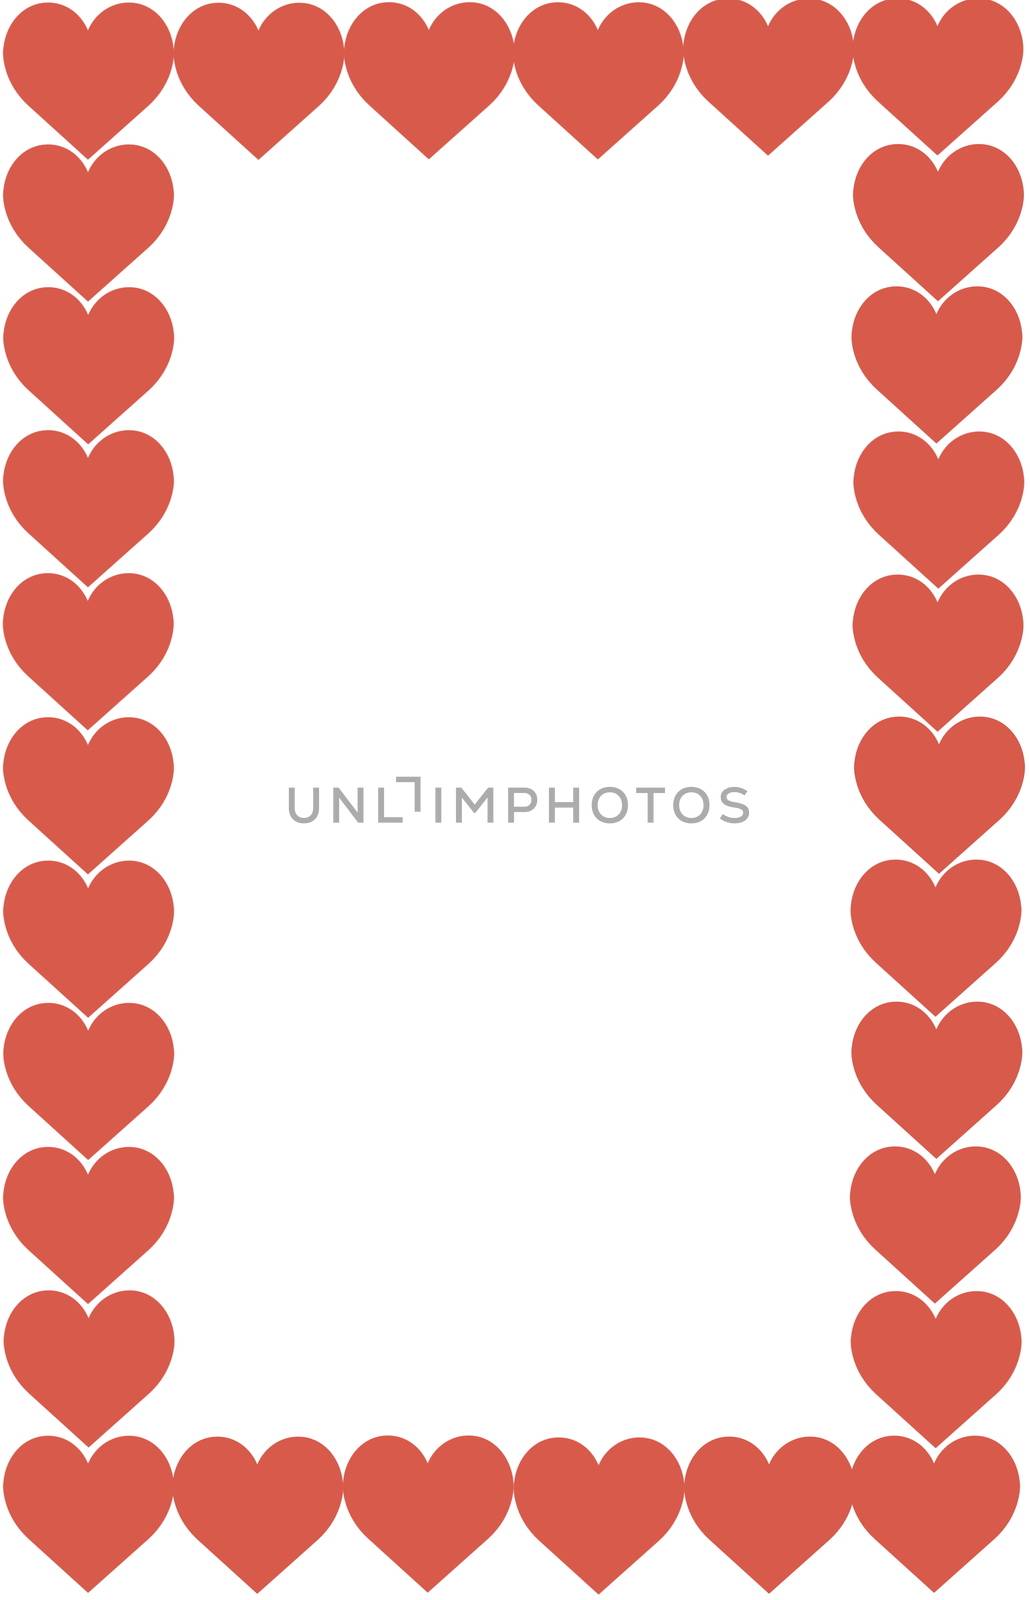 Red Hearts Design on White Background. Love, Heart, Valentine's Day. Can be used for Articles, Printing, Illustration purpose, background, website, businesses, presentations, Product Promotions etc.